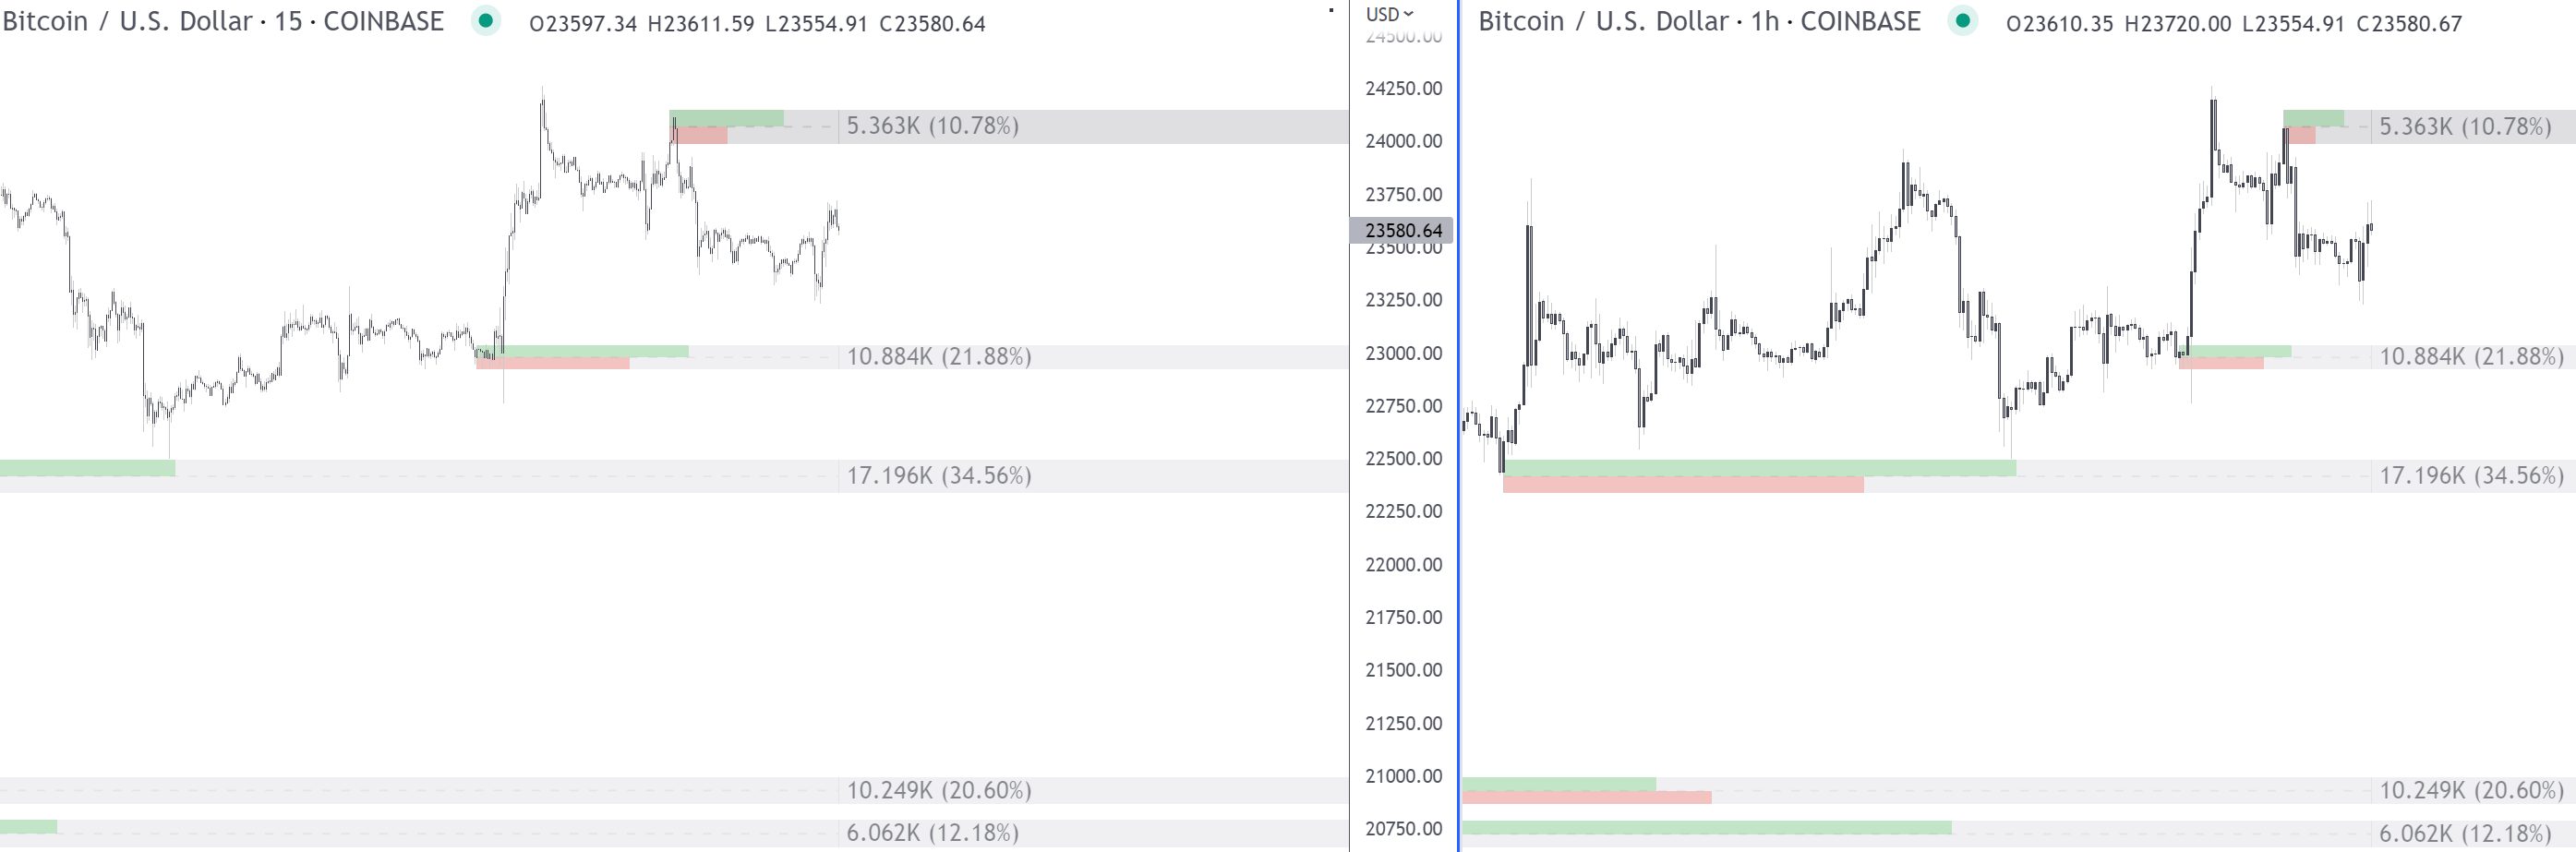 15m chart with 1h order blocks (left) and 1h chart with 1h order blocks (right)